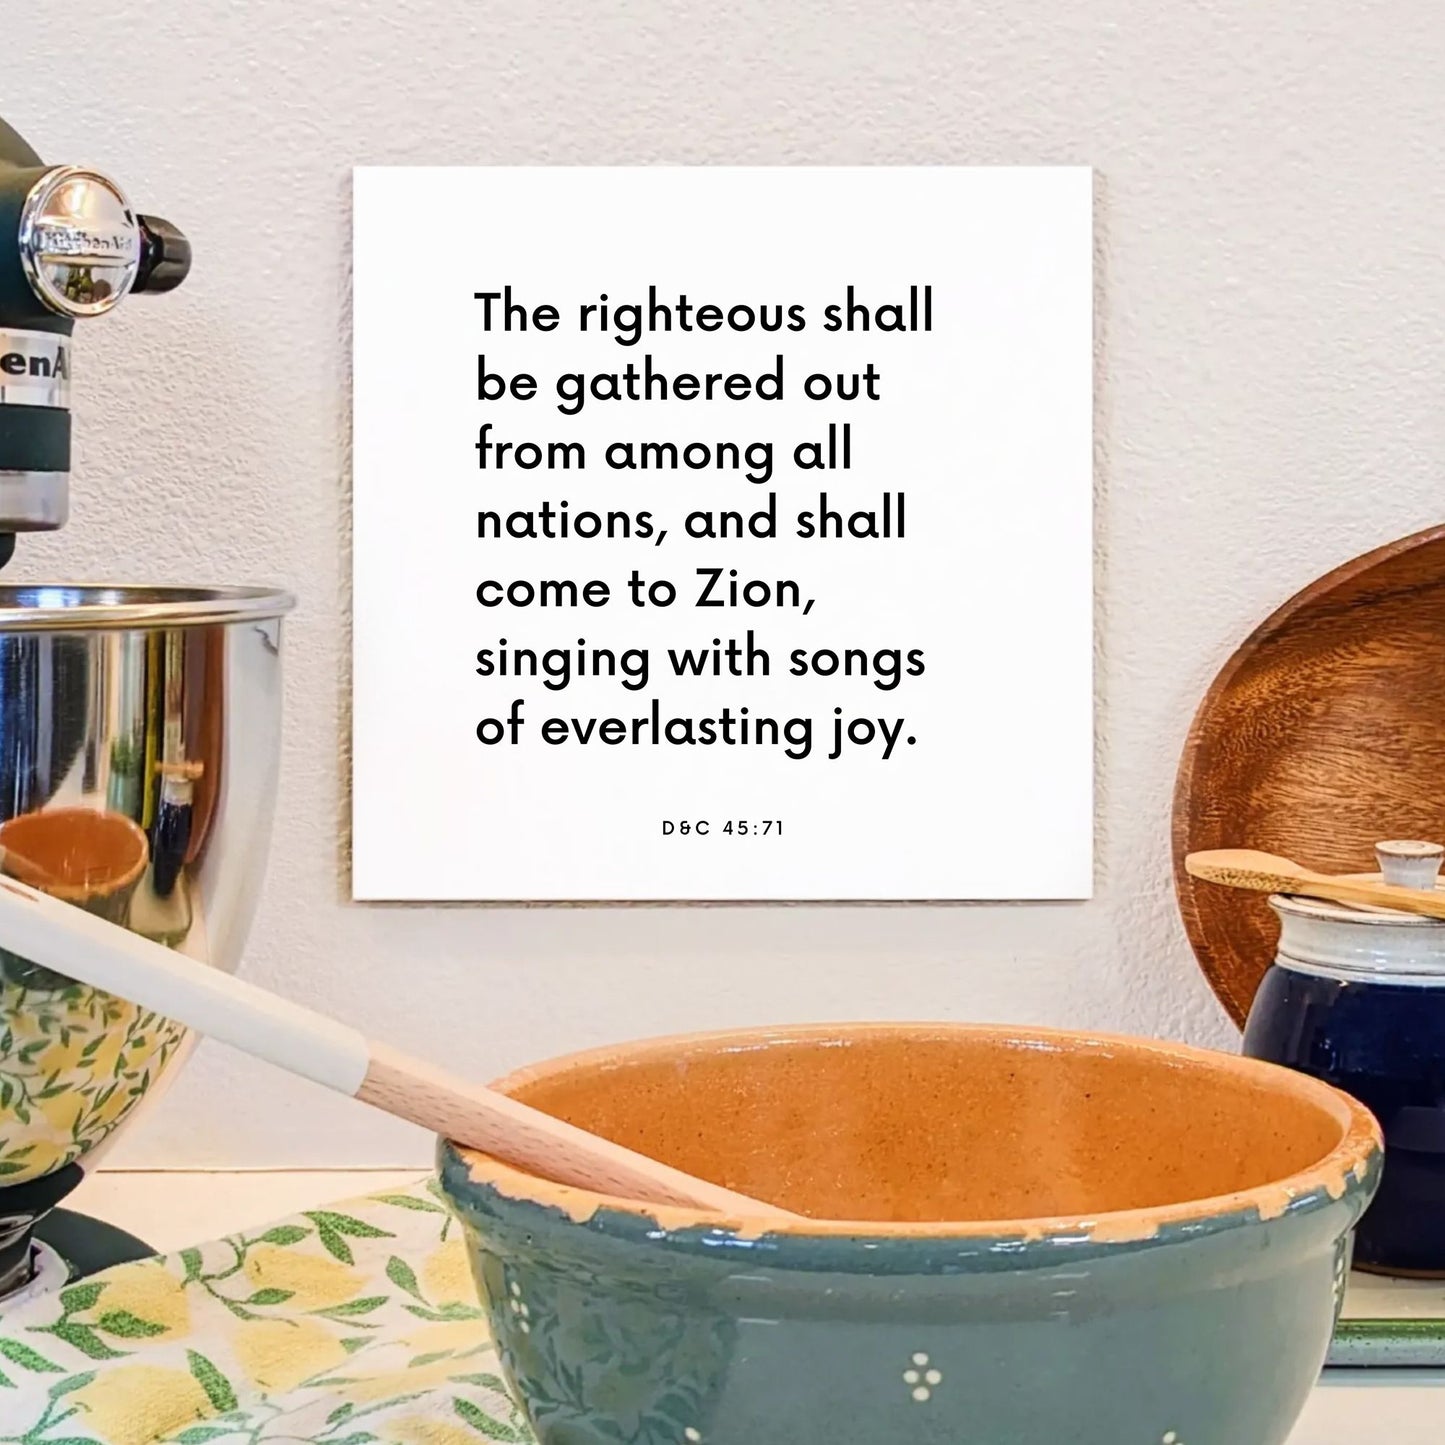 Kitchen mouting of the scripture tile for D&C 45:71 - "The righteous shall be gathered out from among all nations"